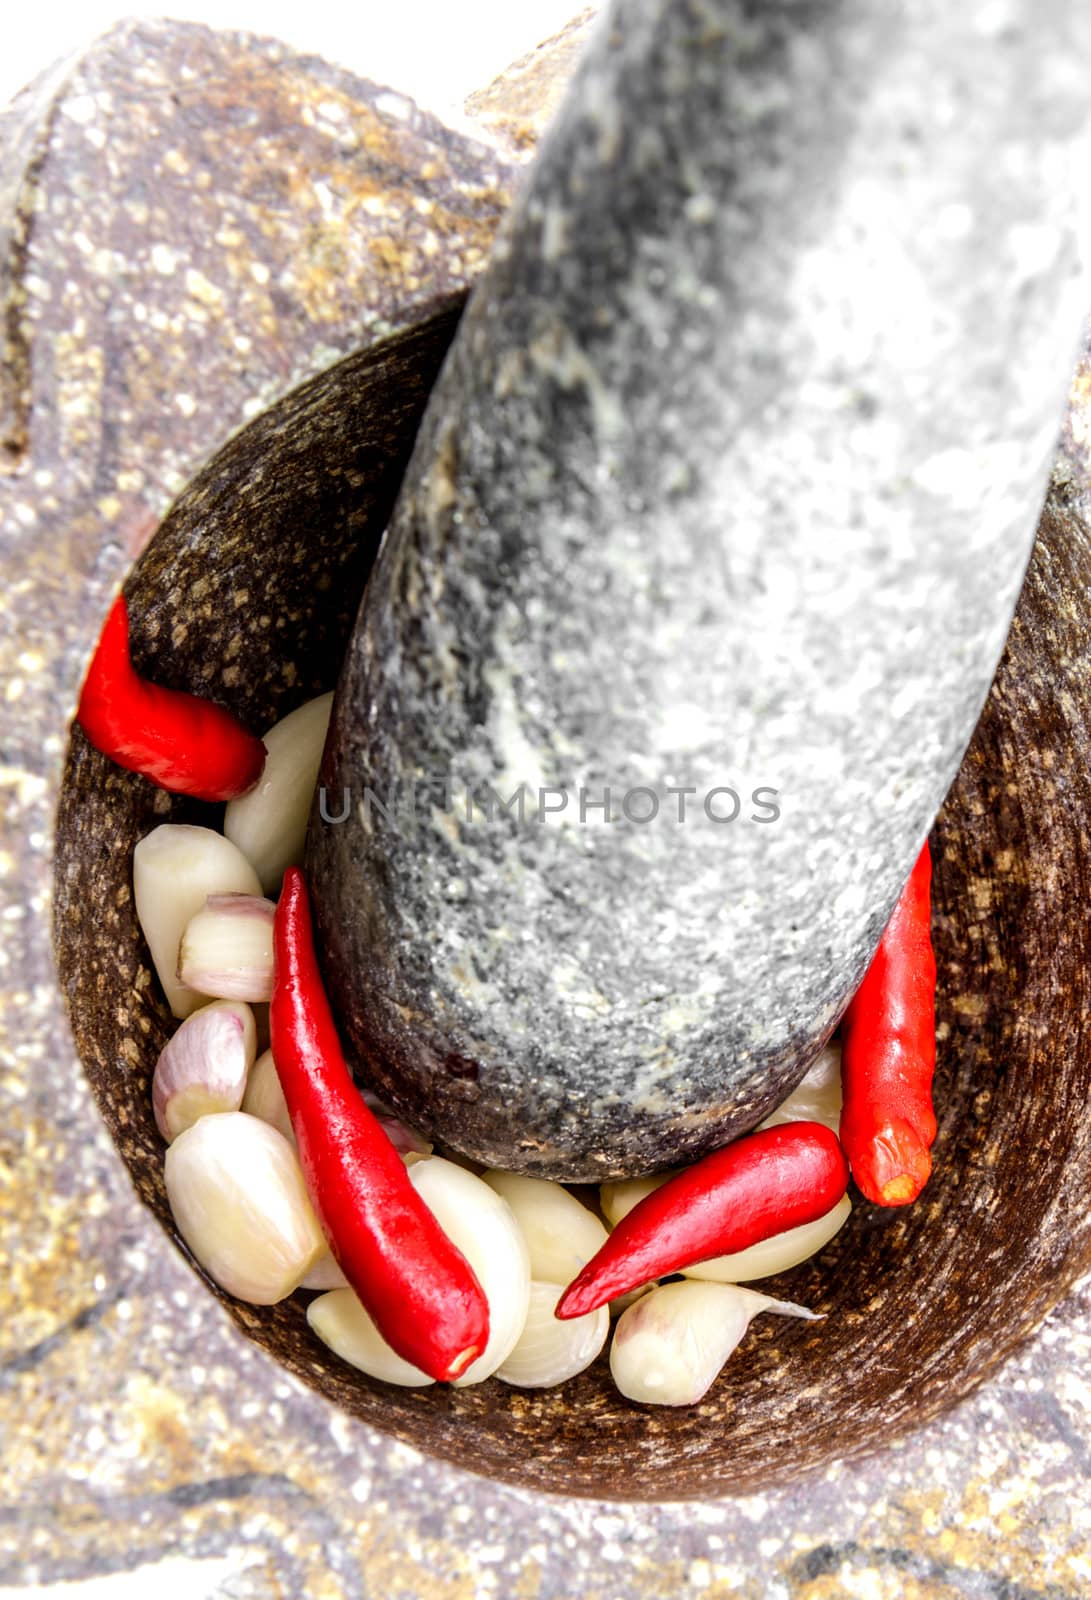 garlic and red chili pepper in stone mortar by bunwit